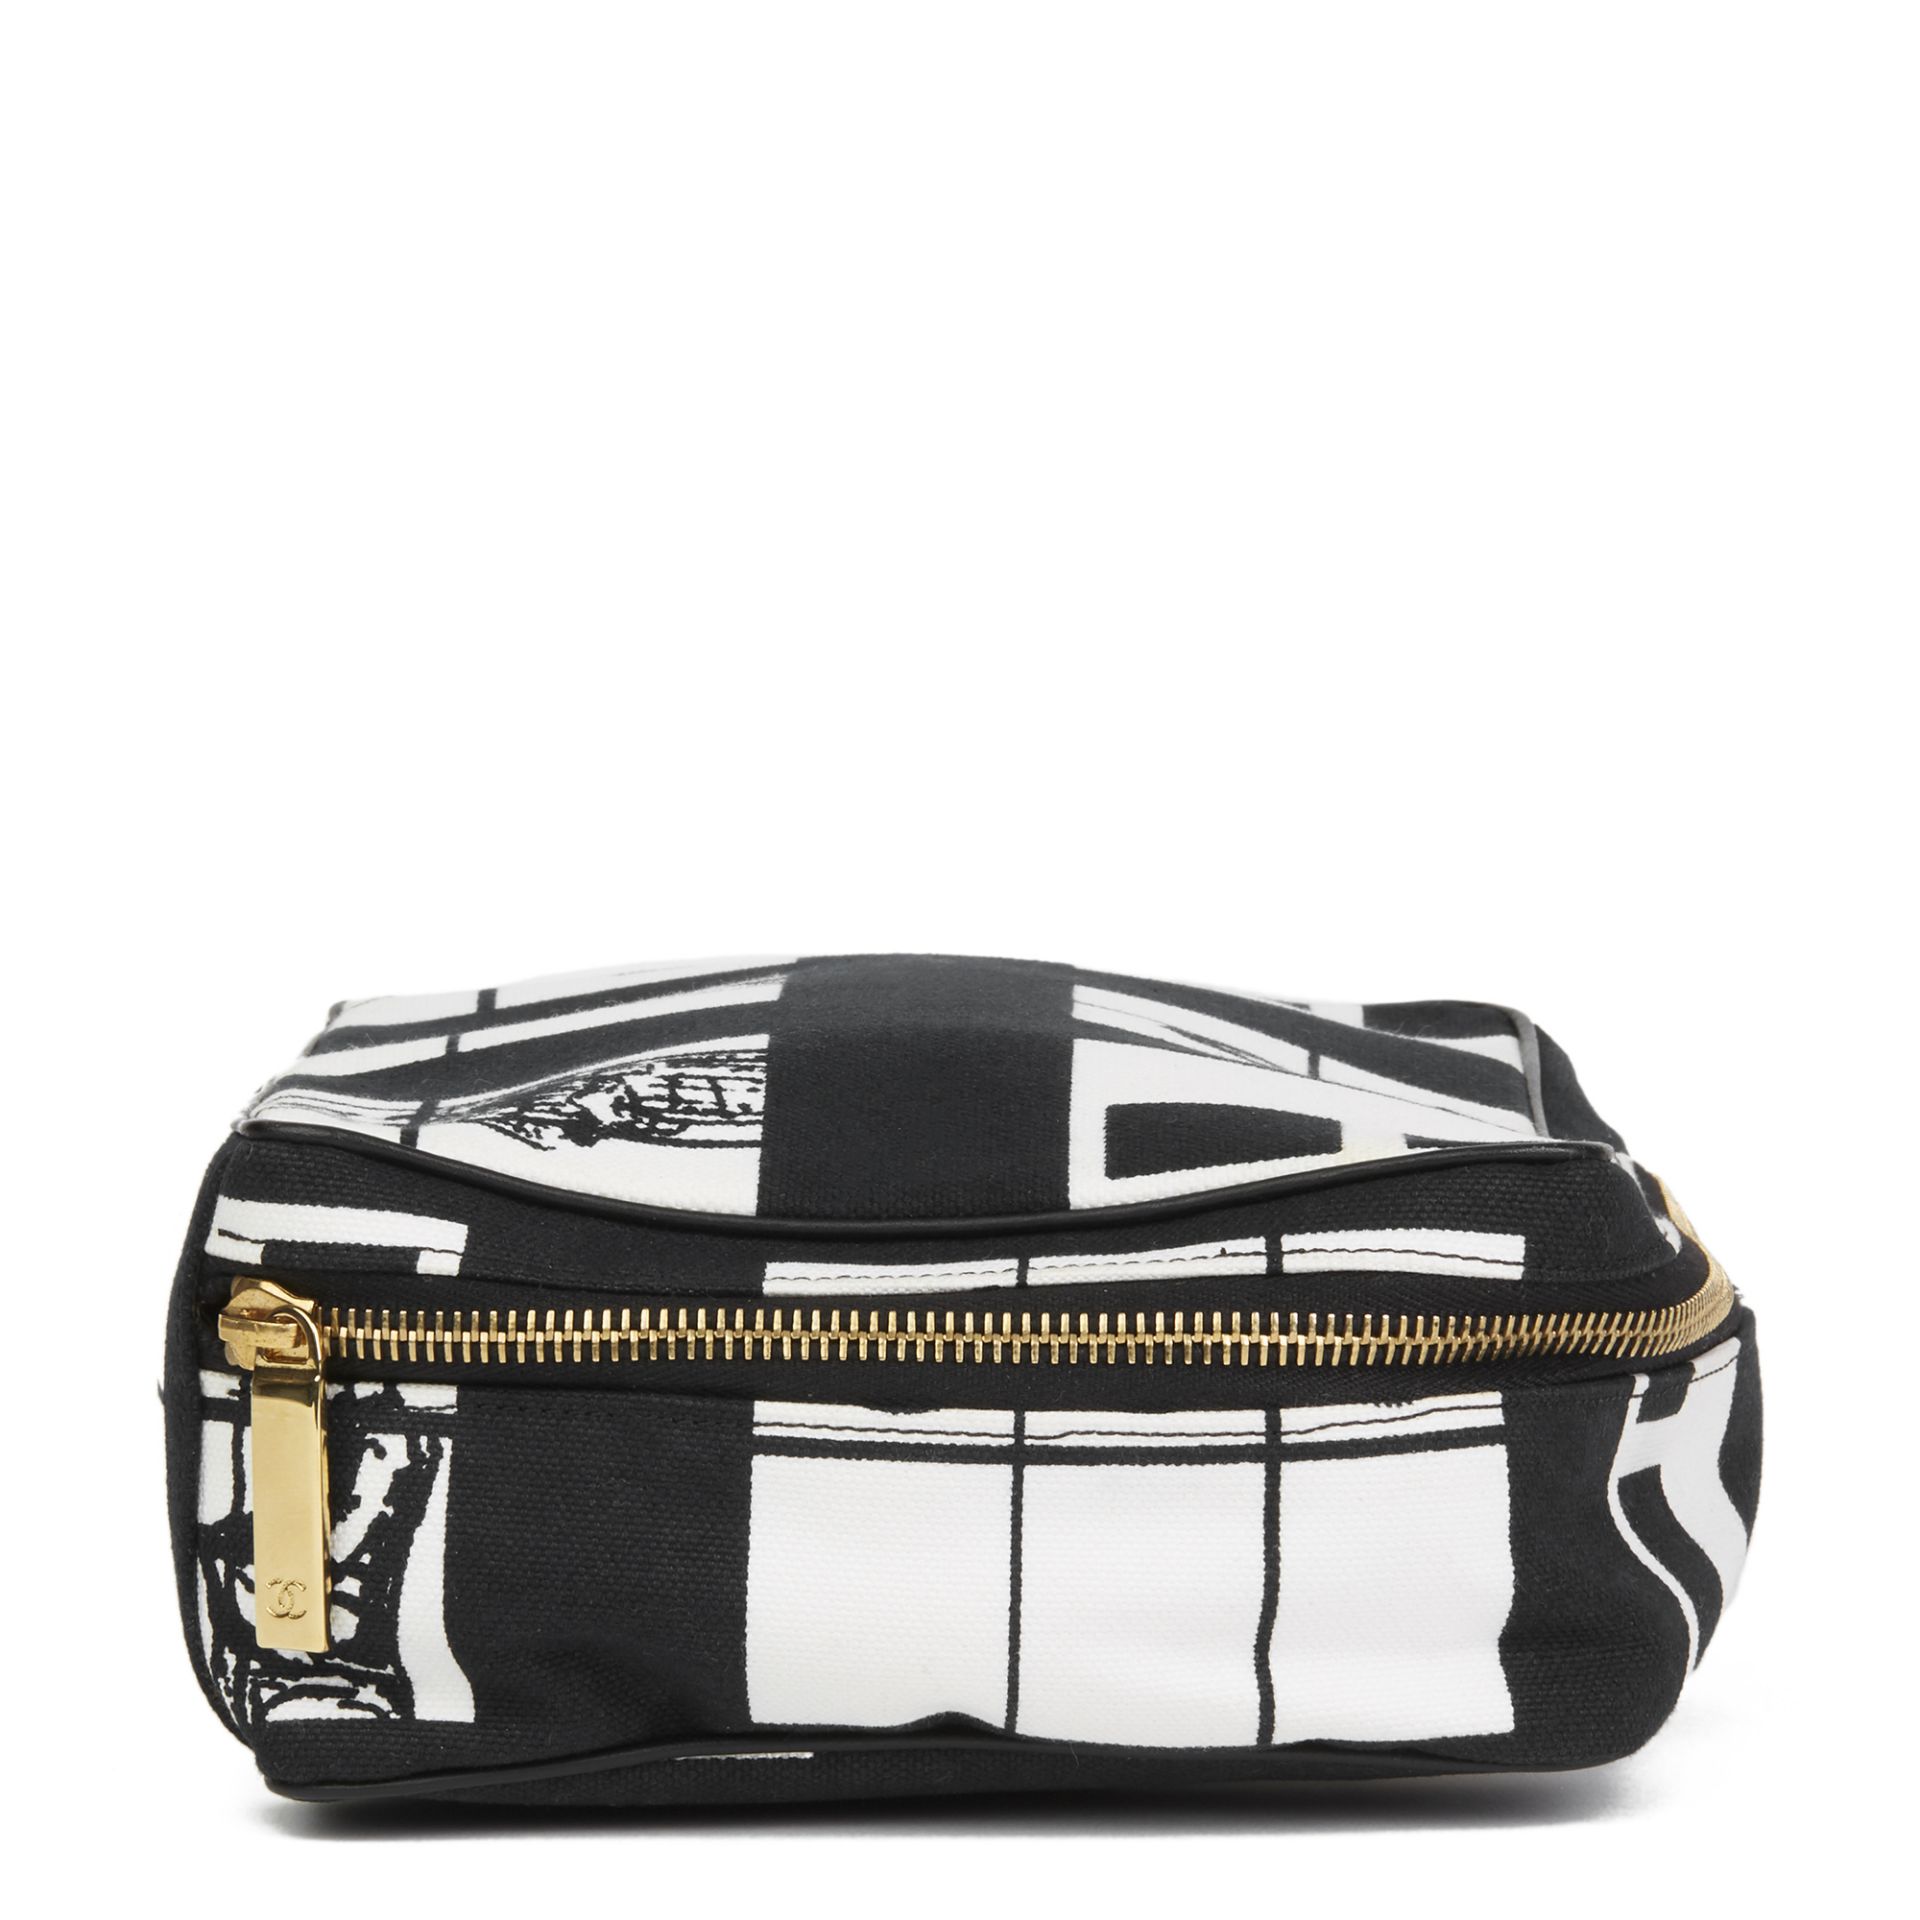 Chanel Black & White Canvas 'Window Line' Toiletry Pouch - Image 10 of 11